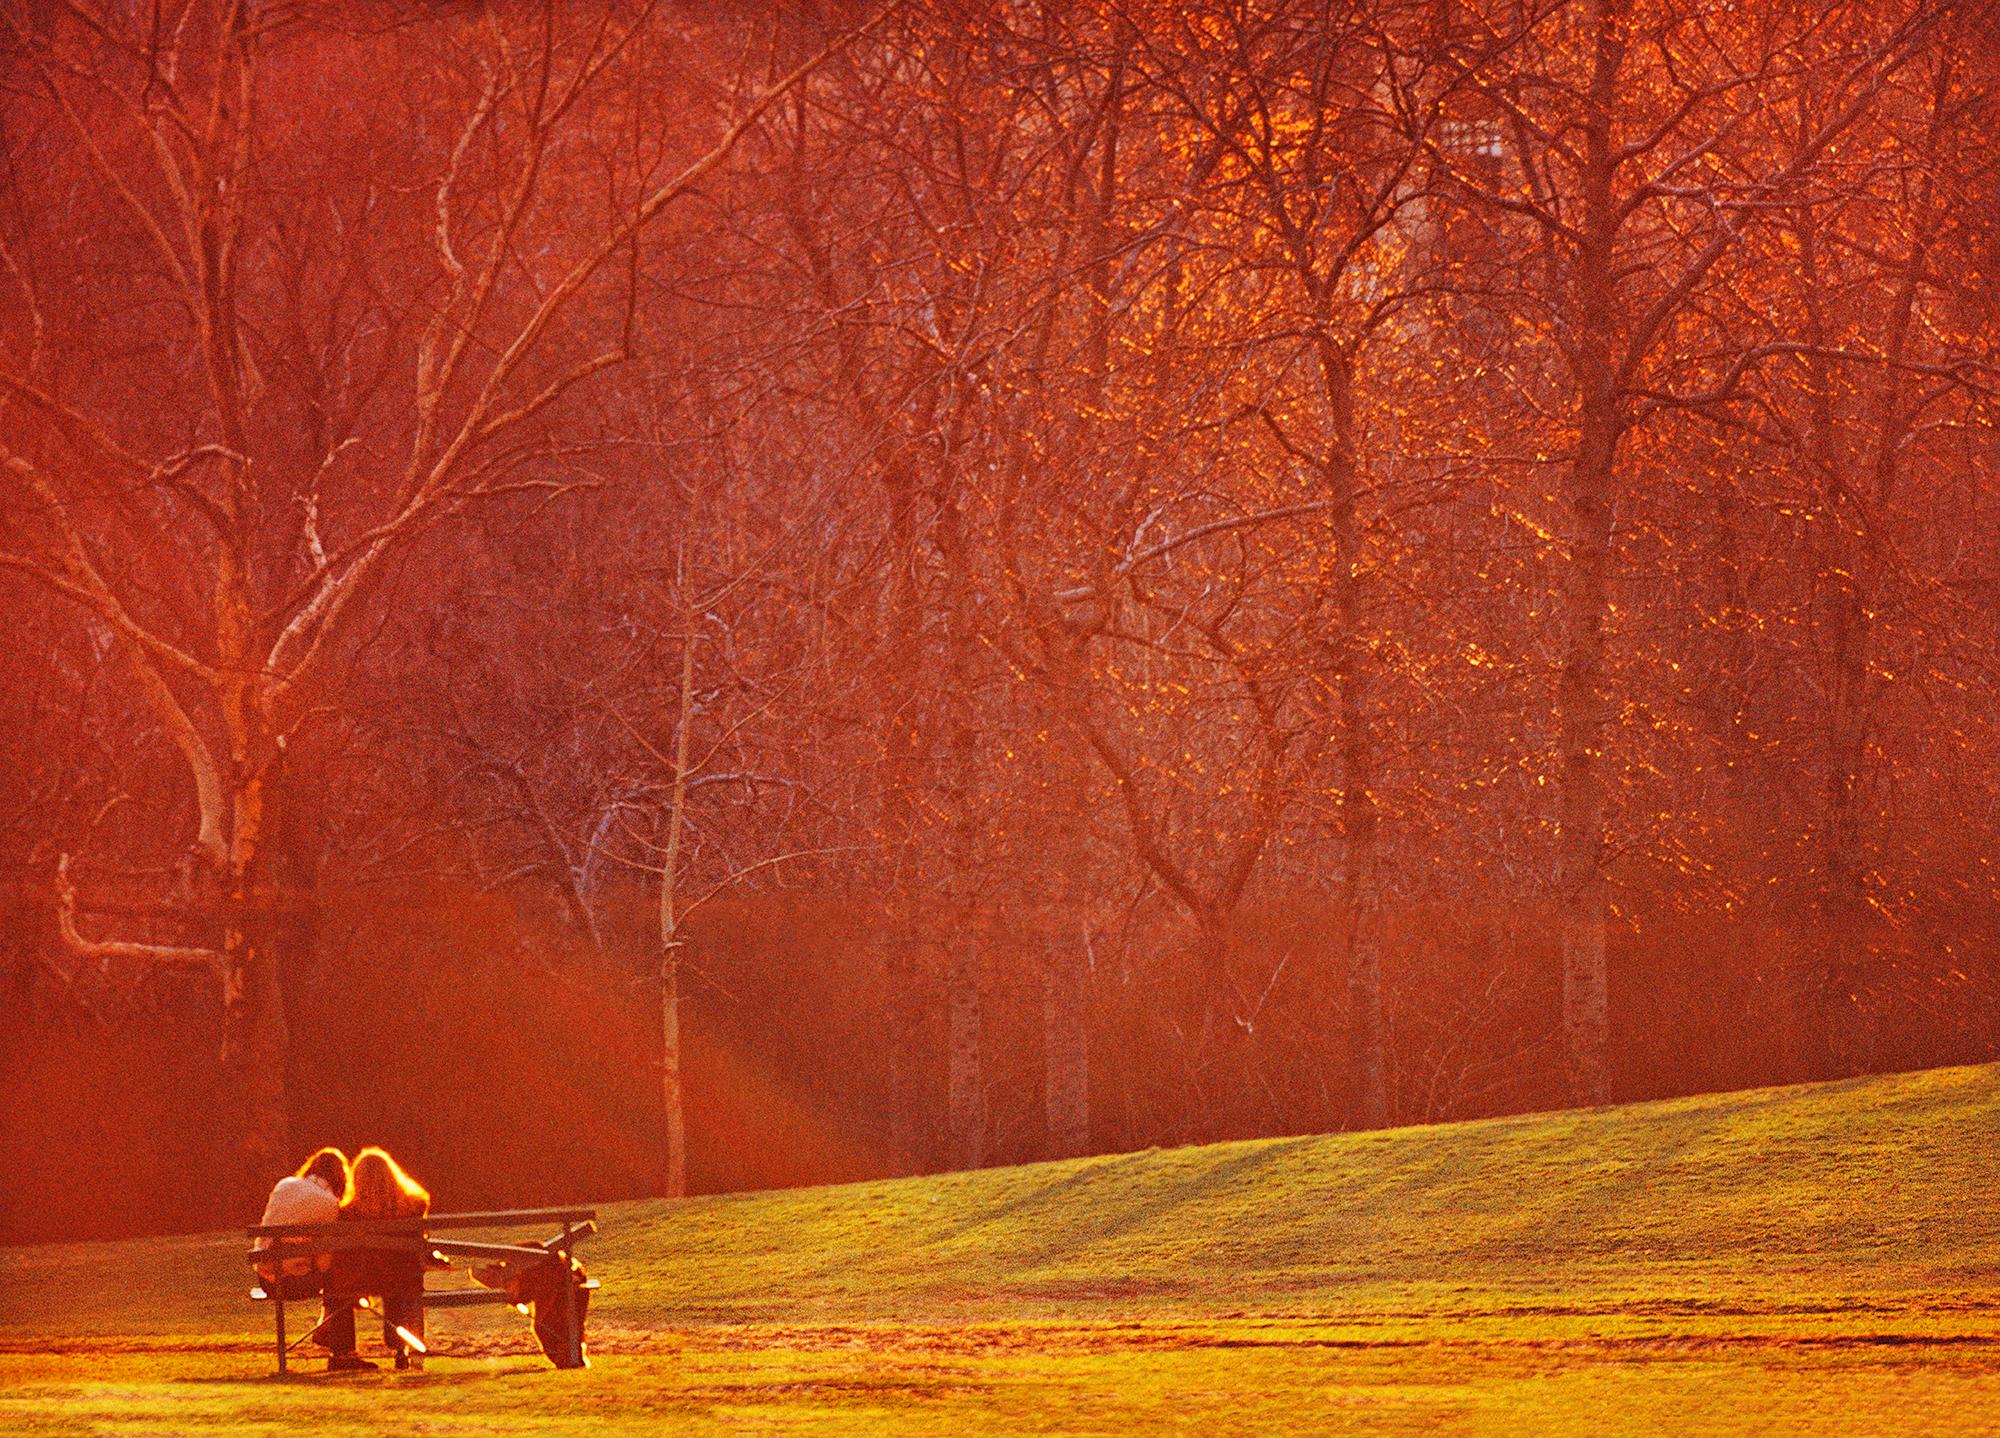 Mitchell Funk Abstract Photograph - Golden Light Illuminates a Romantic Couple in Central Park - Amber and Orange 